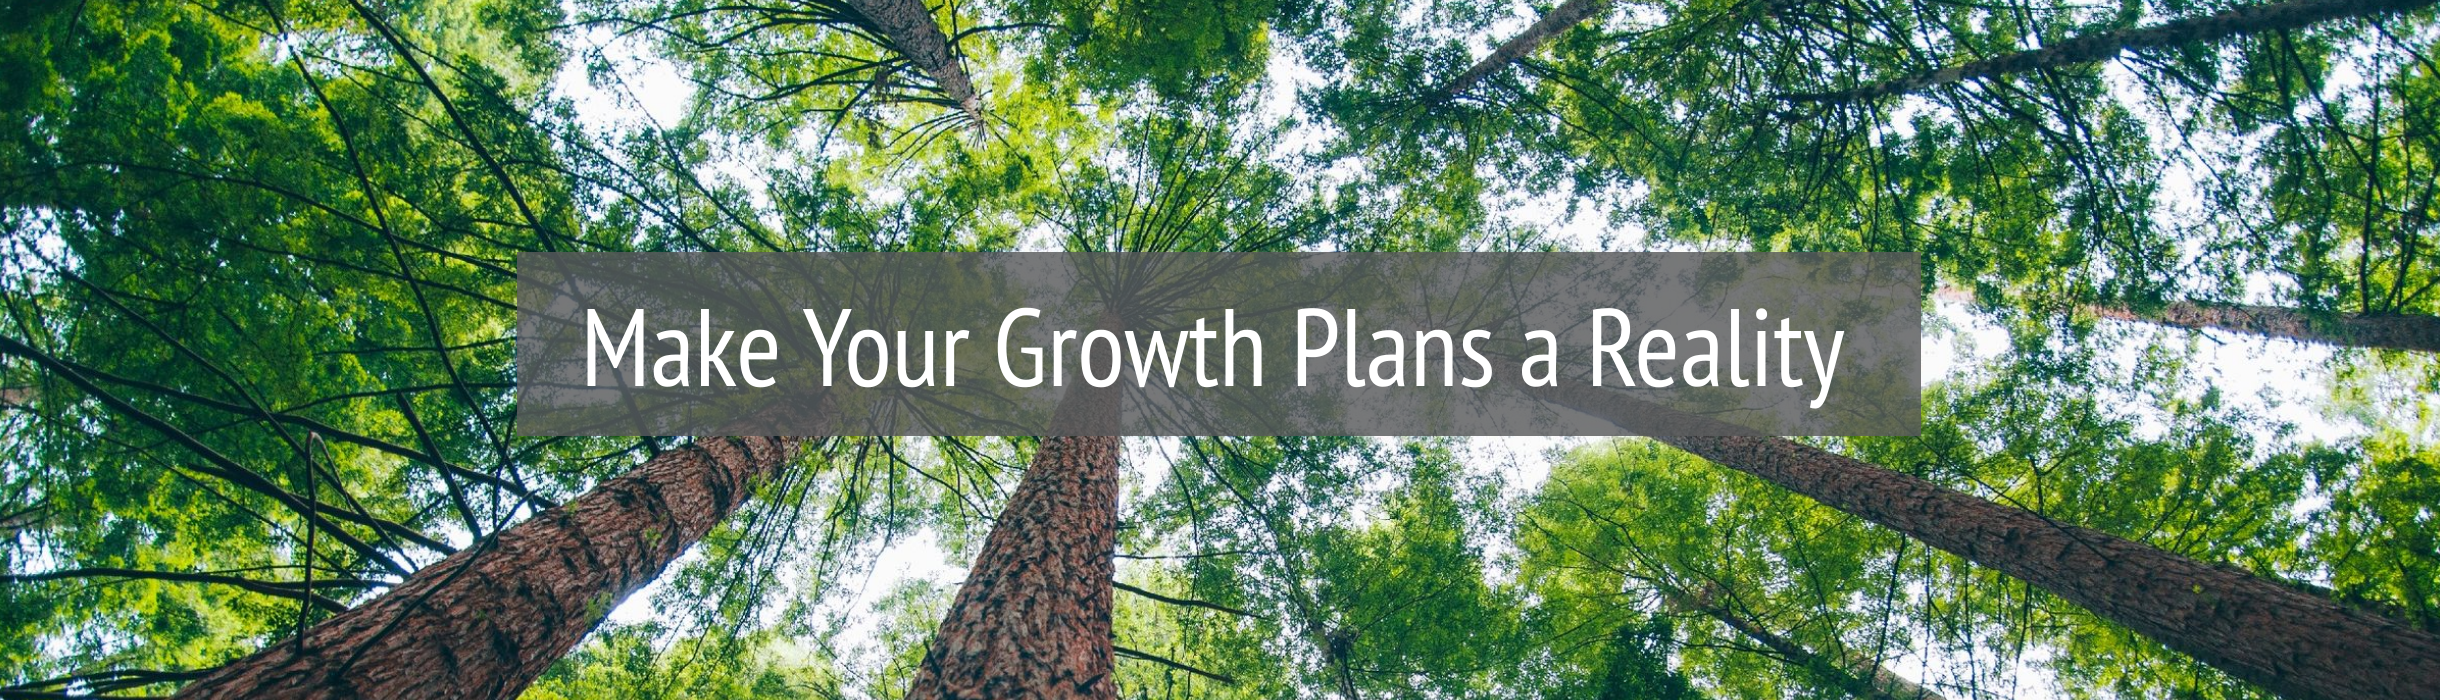 Make Your Growth Plans a Reality